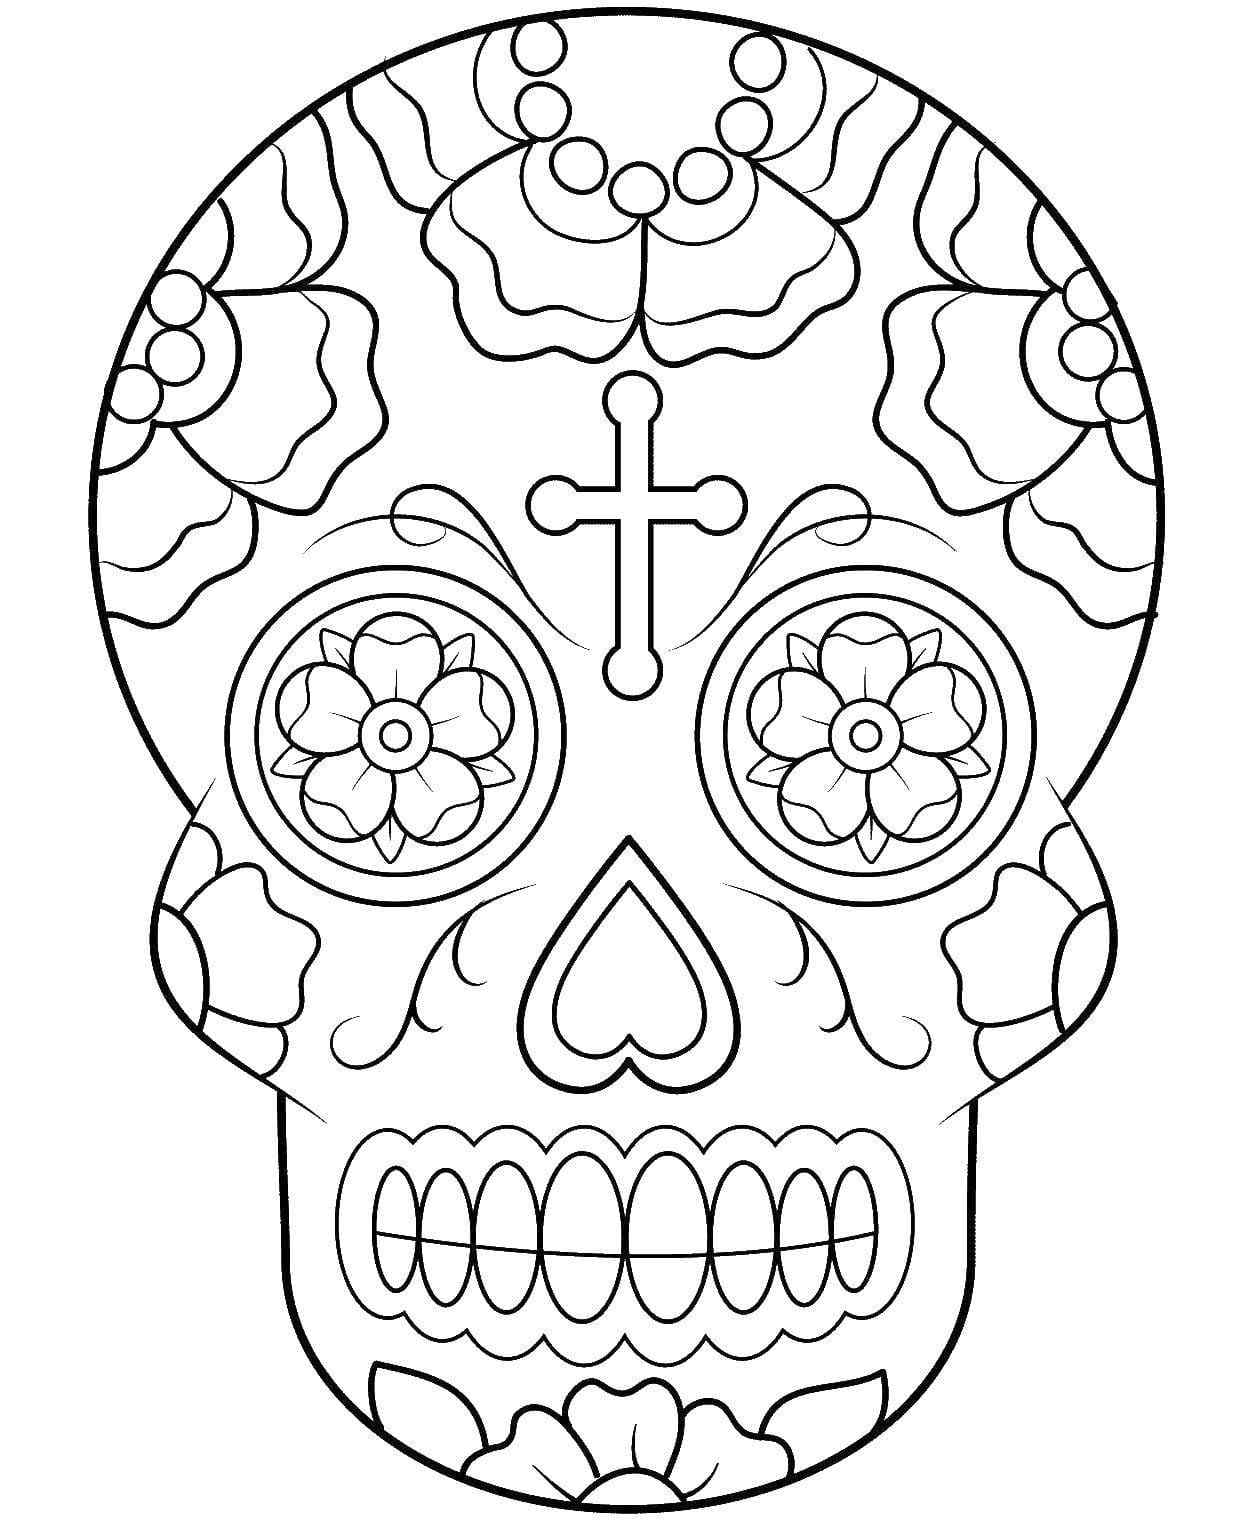 The Magical Image Of The Skull Coloring Page